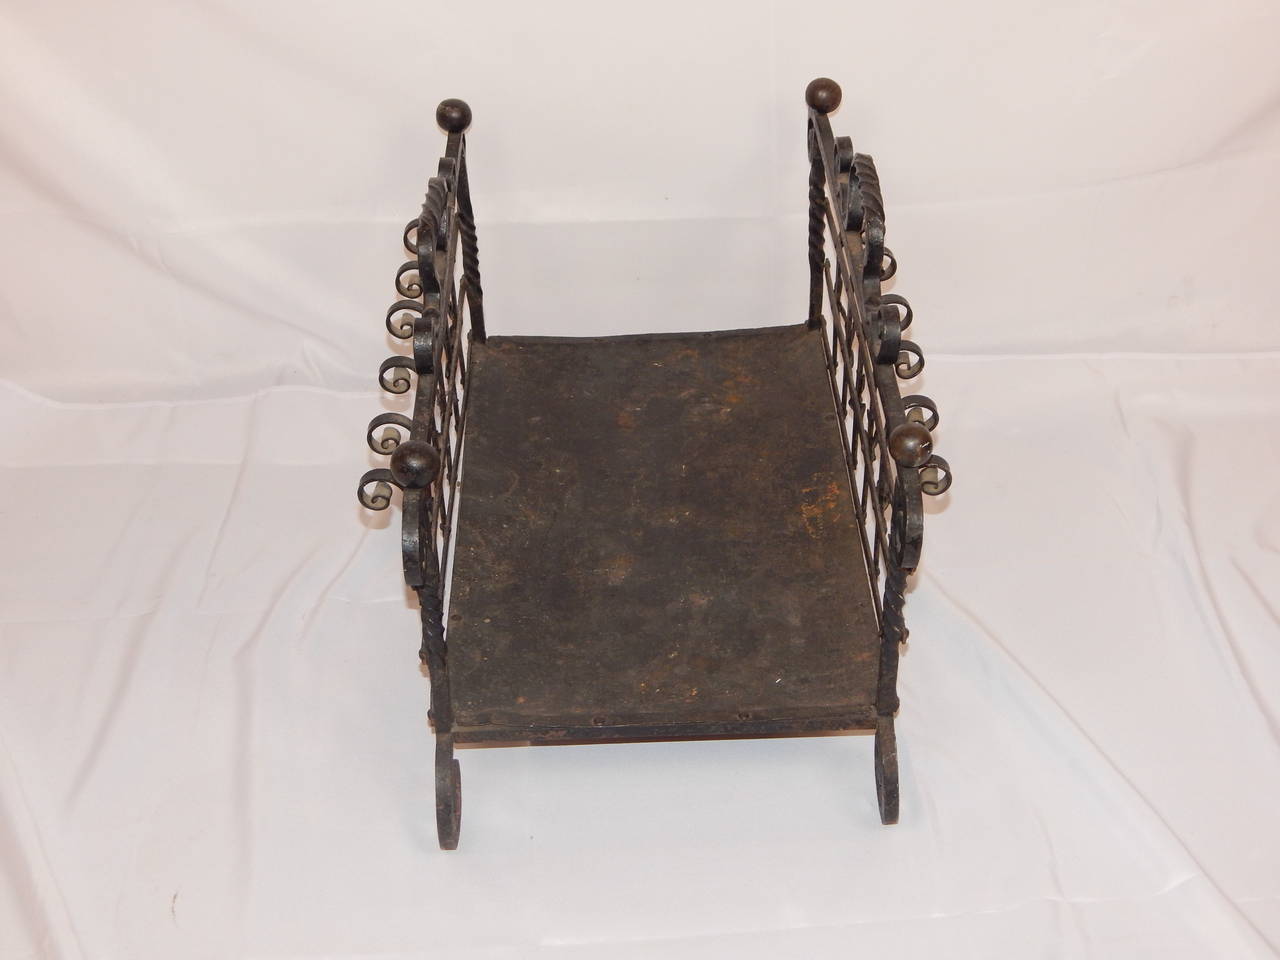 A wonderful antique wrought iron log or fire wood holder.